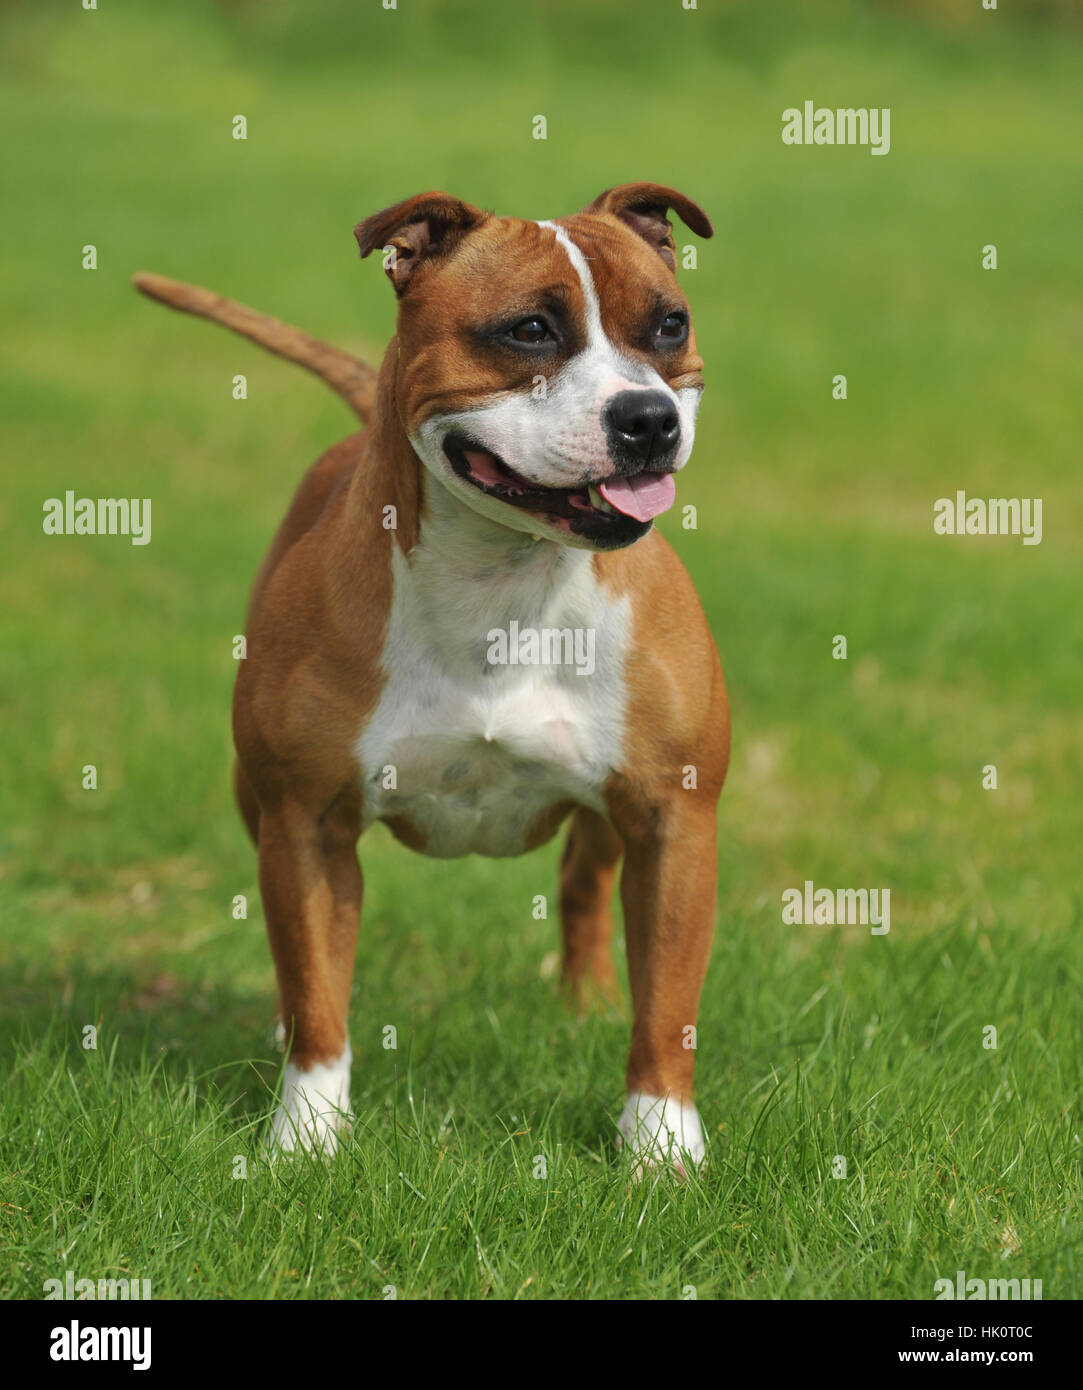 Staffordshire Bull Terrier dog Banque D'Images